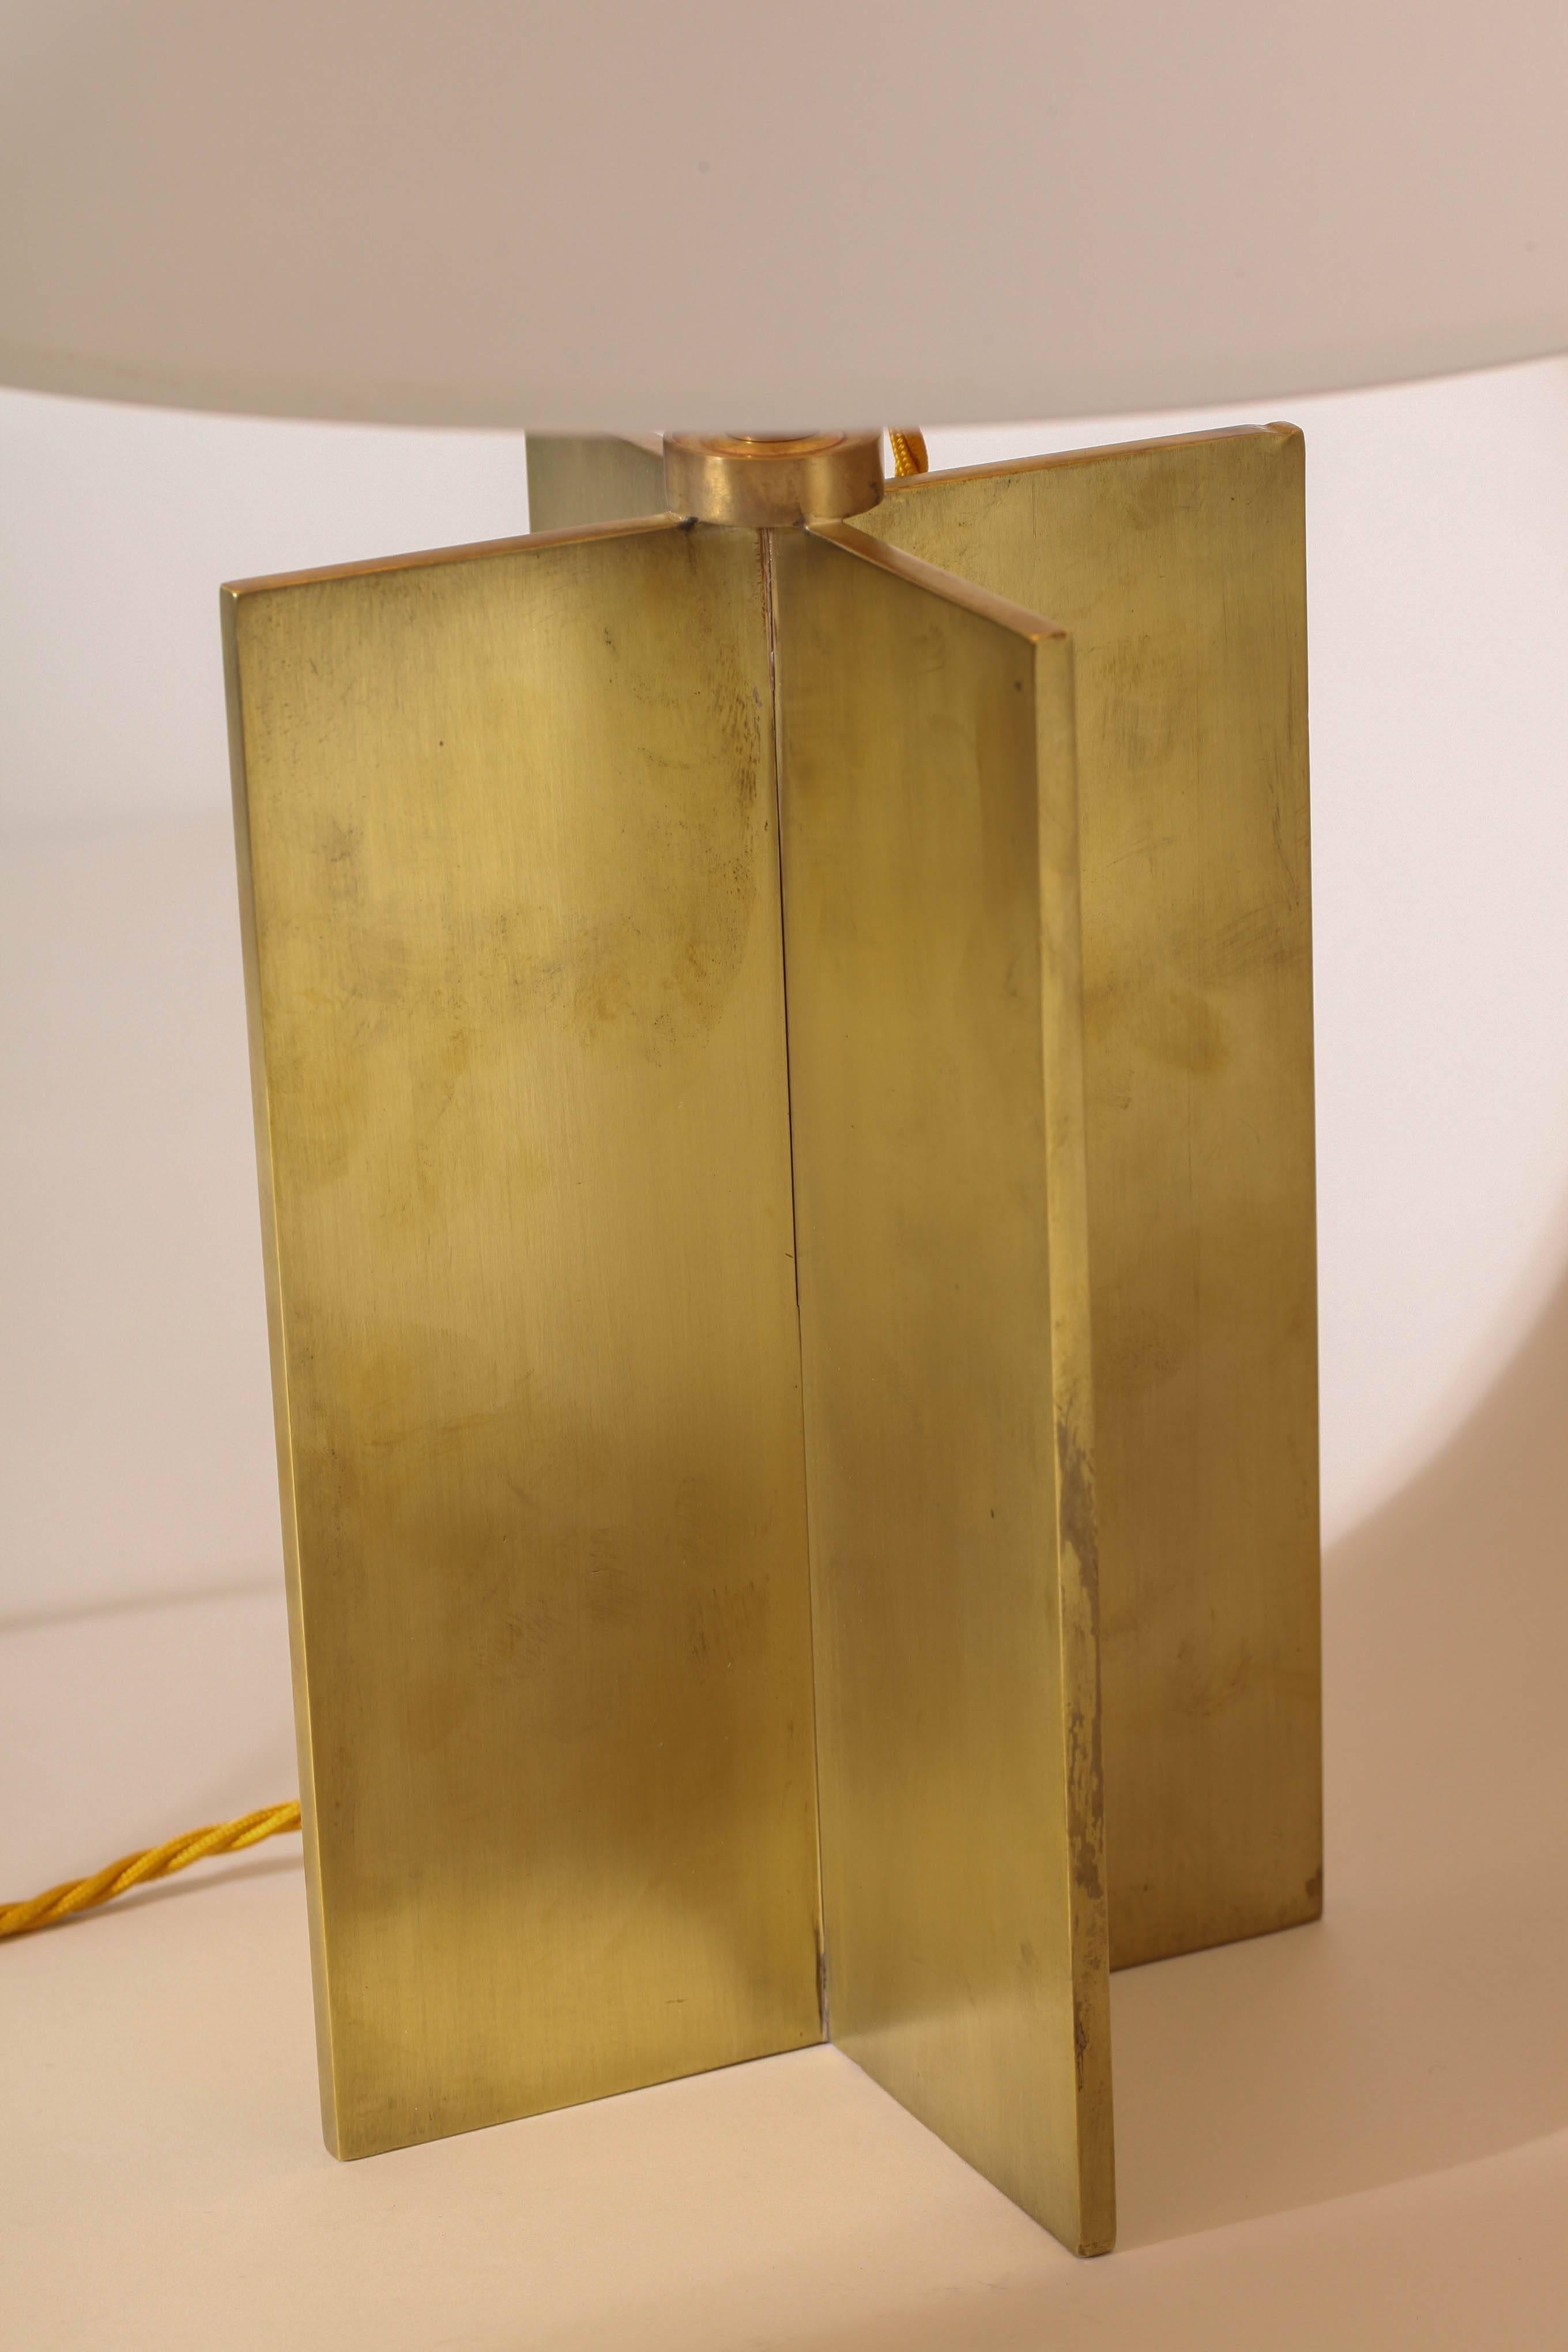 With four perpendicular brass rectangles radiating from a central attachment.
Paper shades.
Rewired to American standard.
Good working condition.
Produced by Comte, Buenos Aires, Argentina
With a certificate of authenticity from the Comite